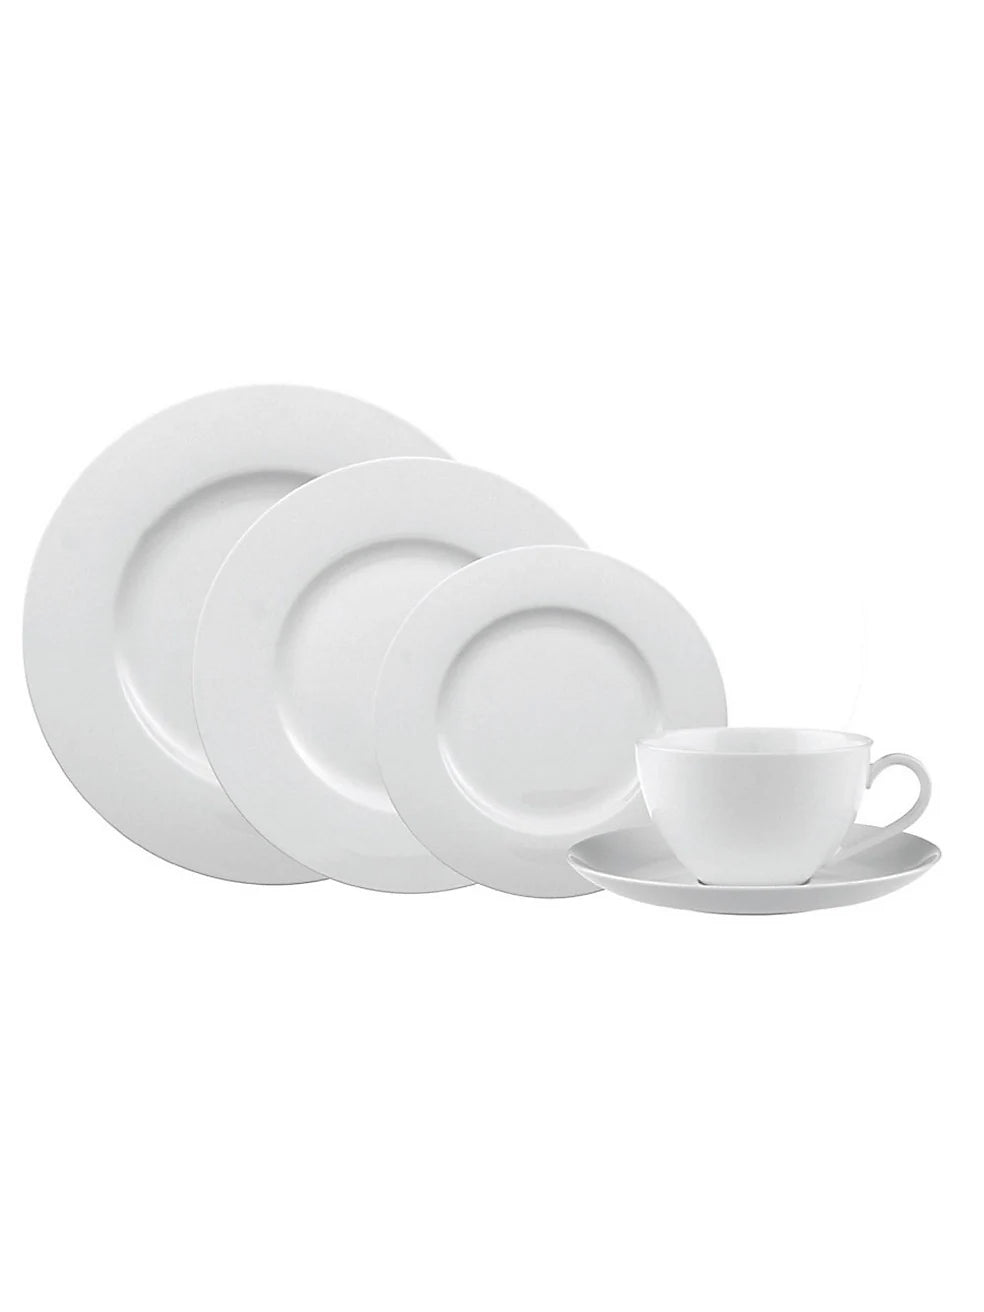 ANMUT 5 Piece Place Setting